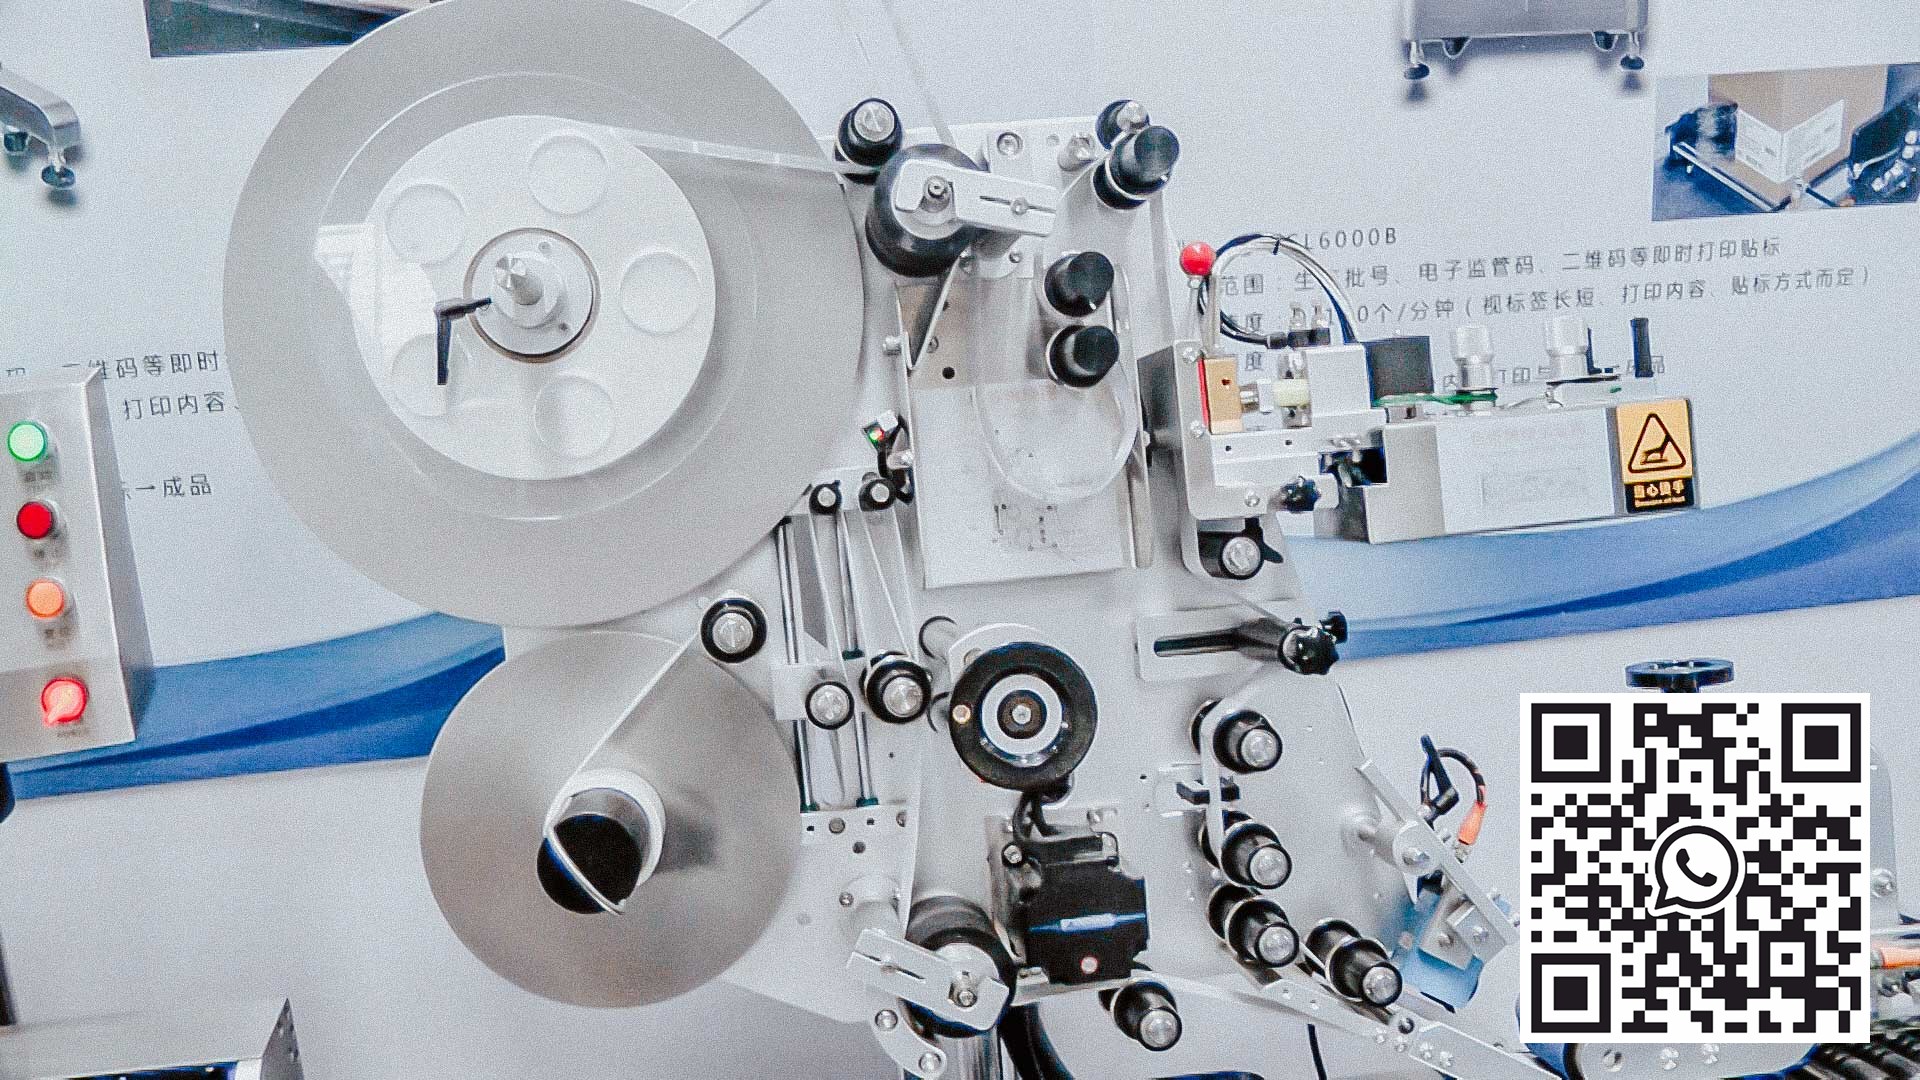 Automatic labeling machine for sticking labels on penicillin bottles